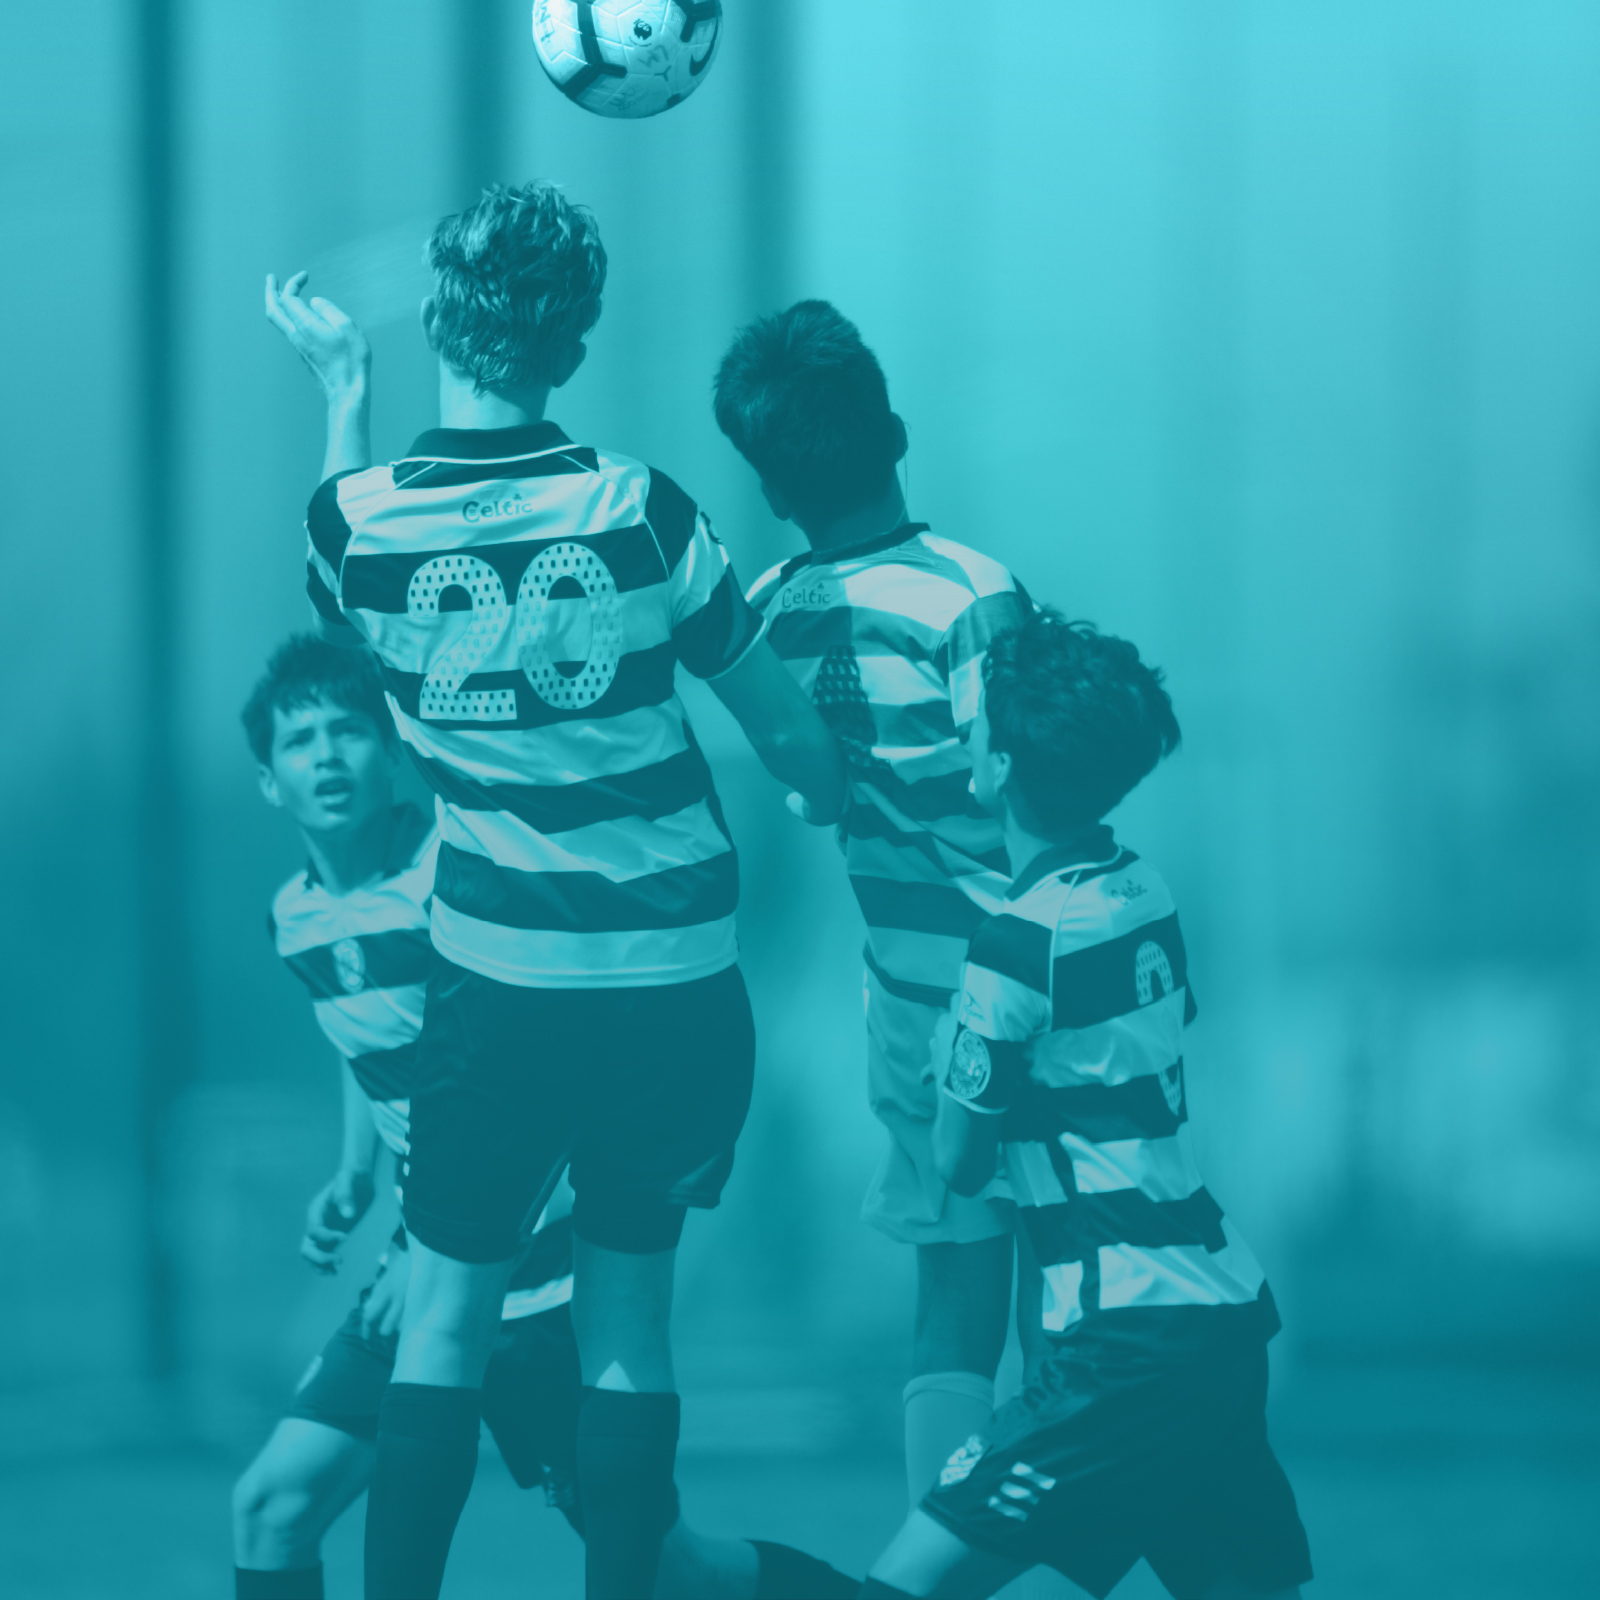 Teal Image Of Boys Playing Soccer